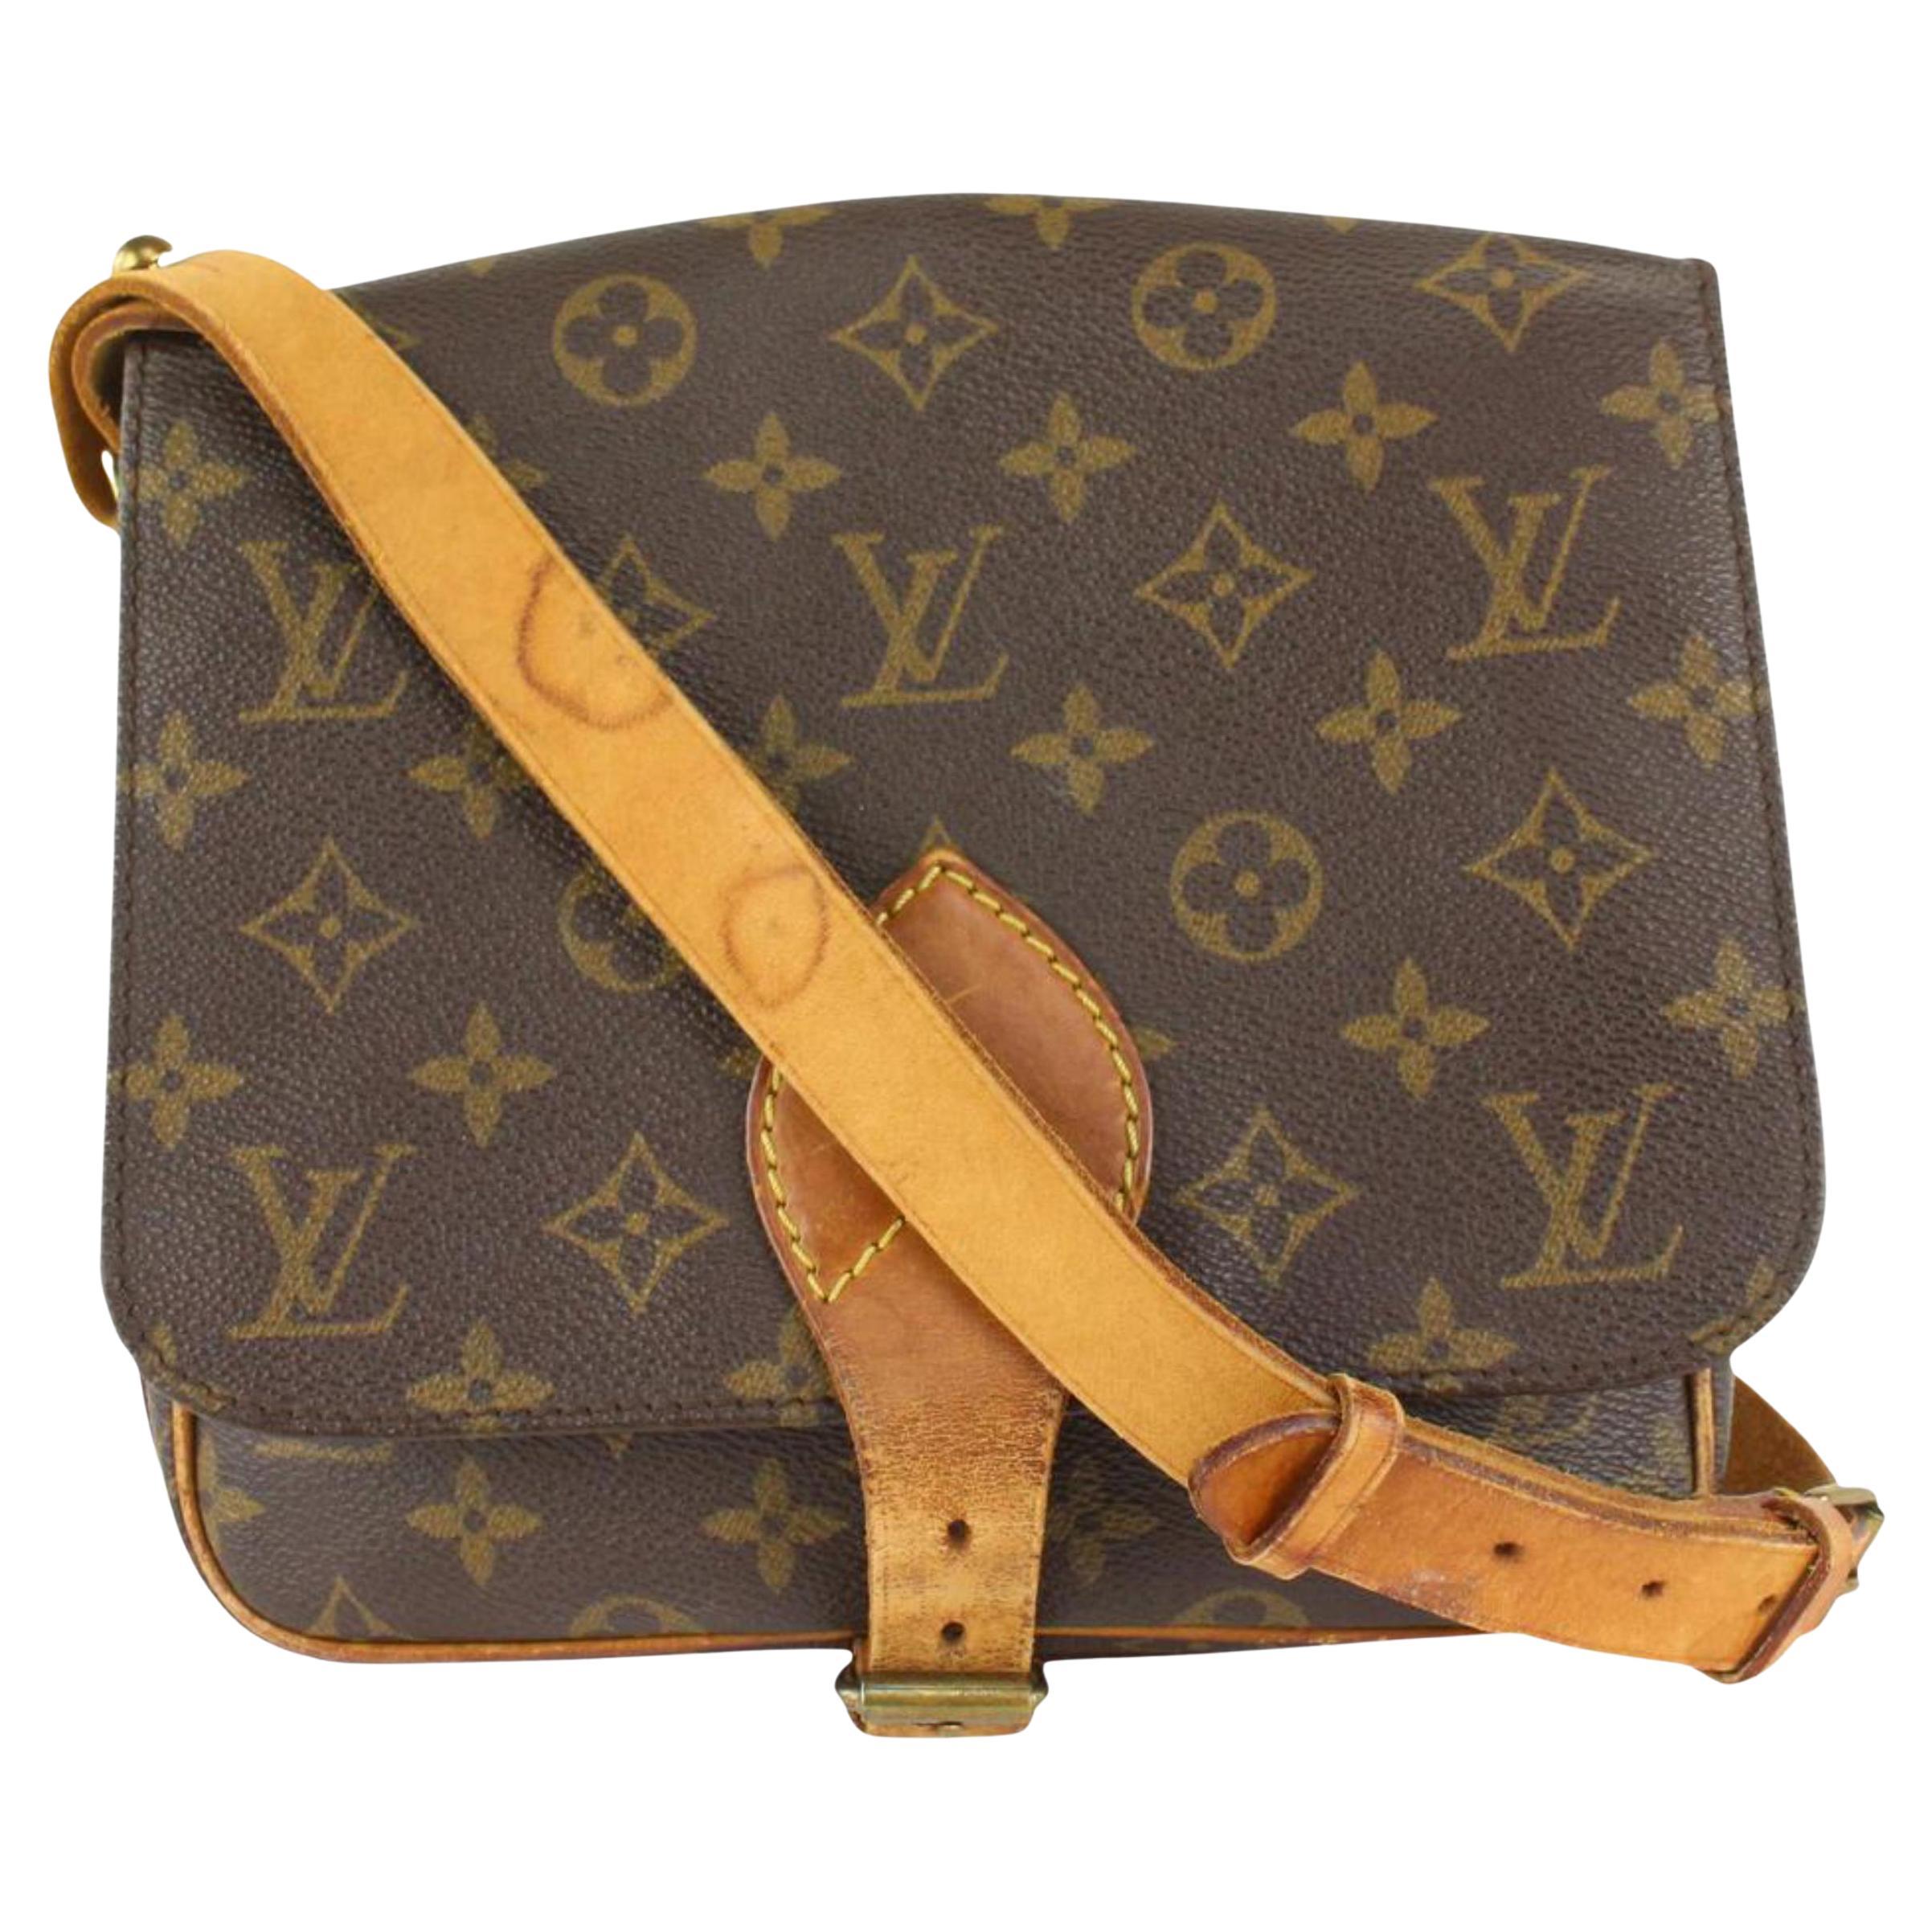 Monogram Cartouchiere GM Crossbody Bag (Authentic Pre-Owned)